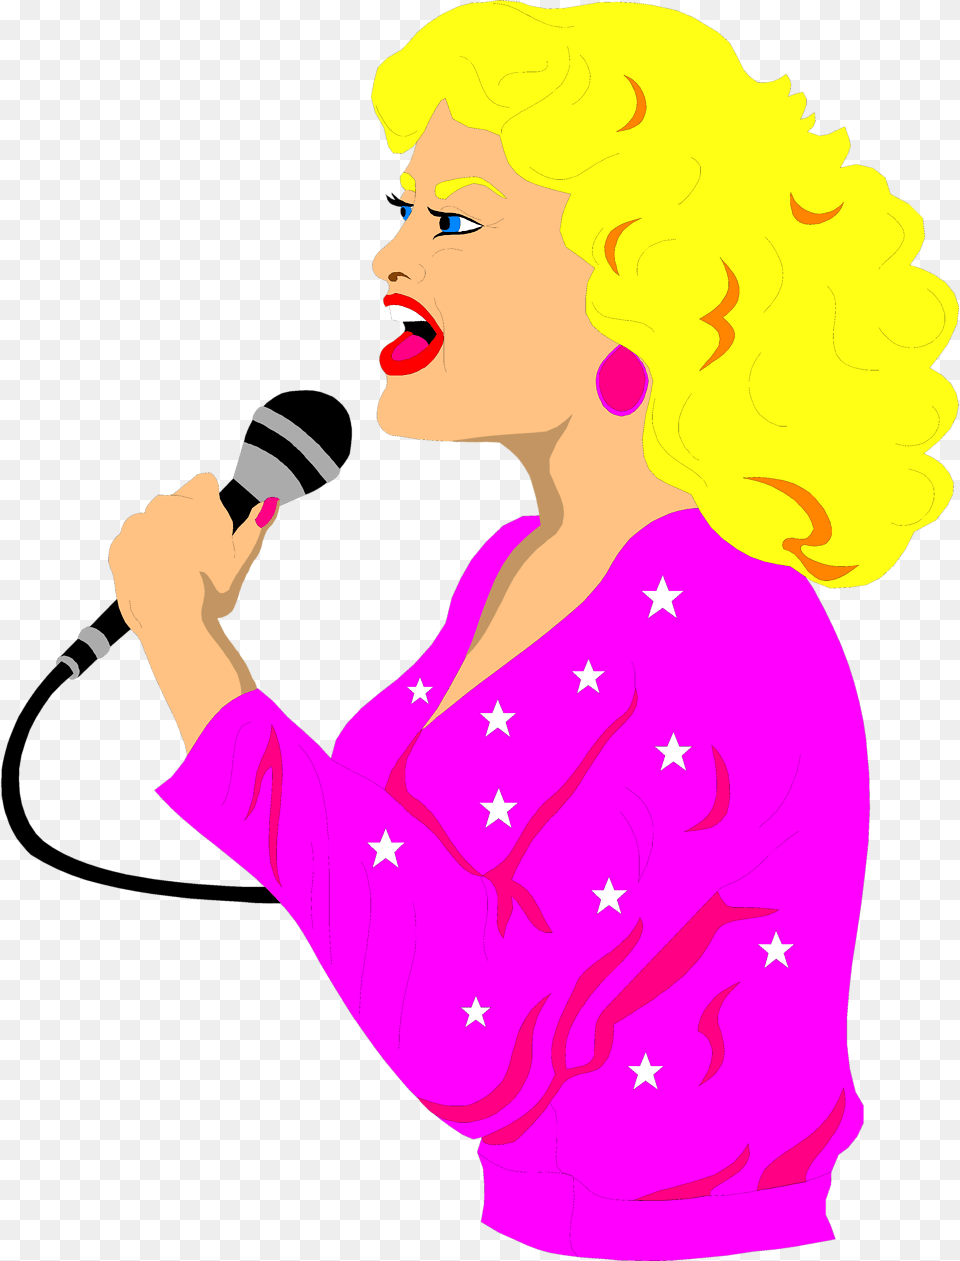 Singer Stock Photo Illustration Of A Beautiful Blond, Electrical Device, Microphone, Adult, Person Png